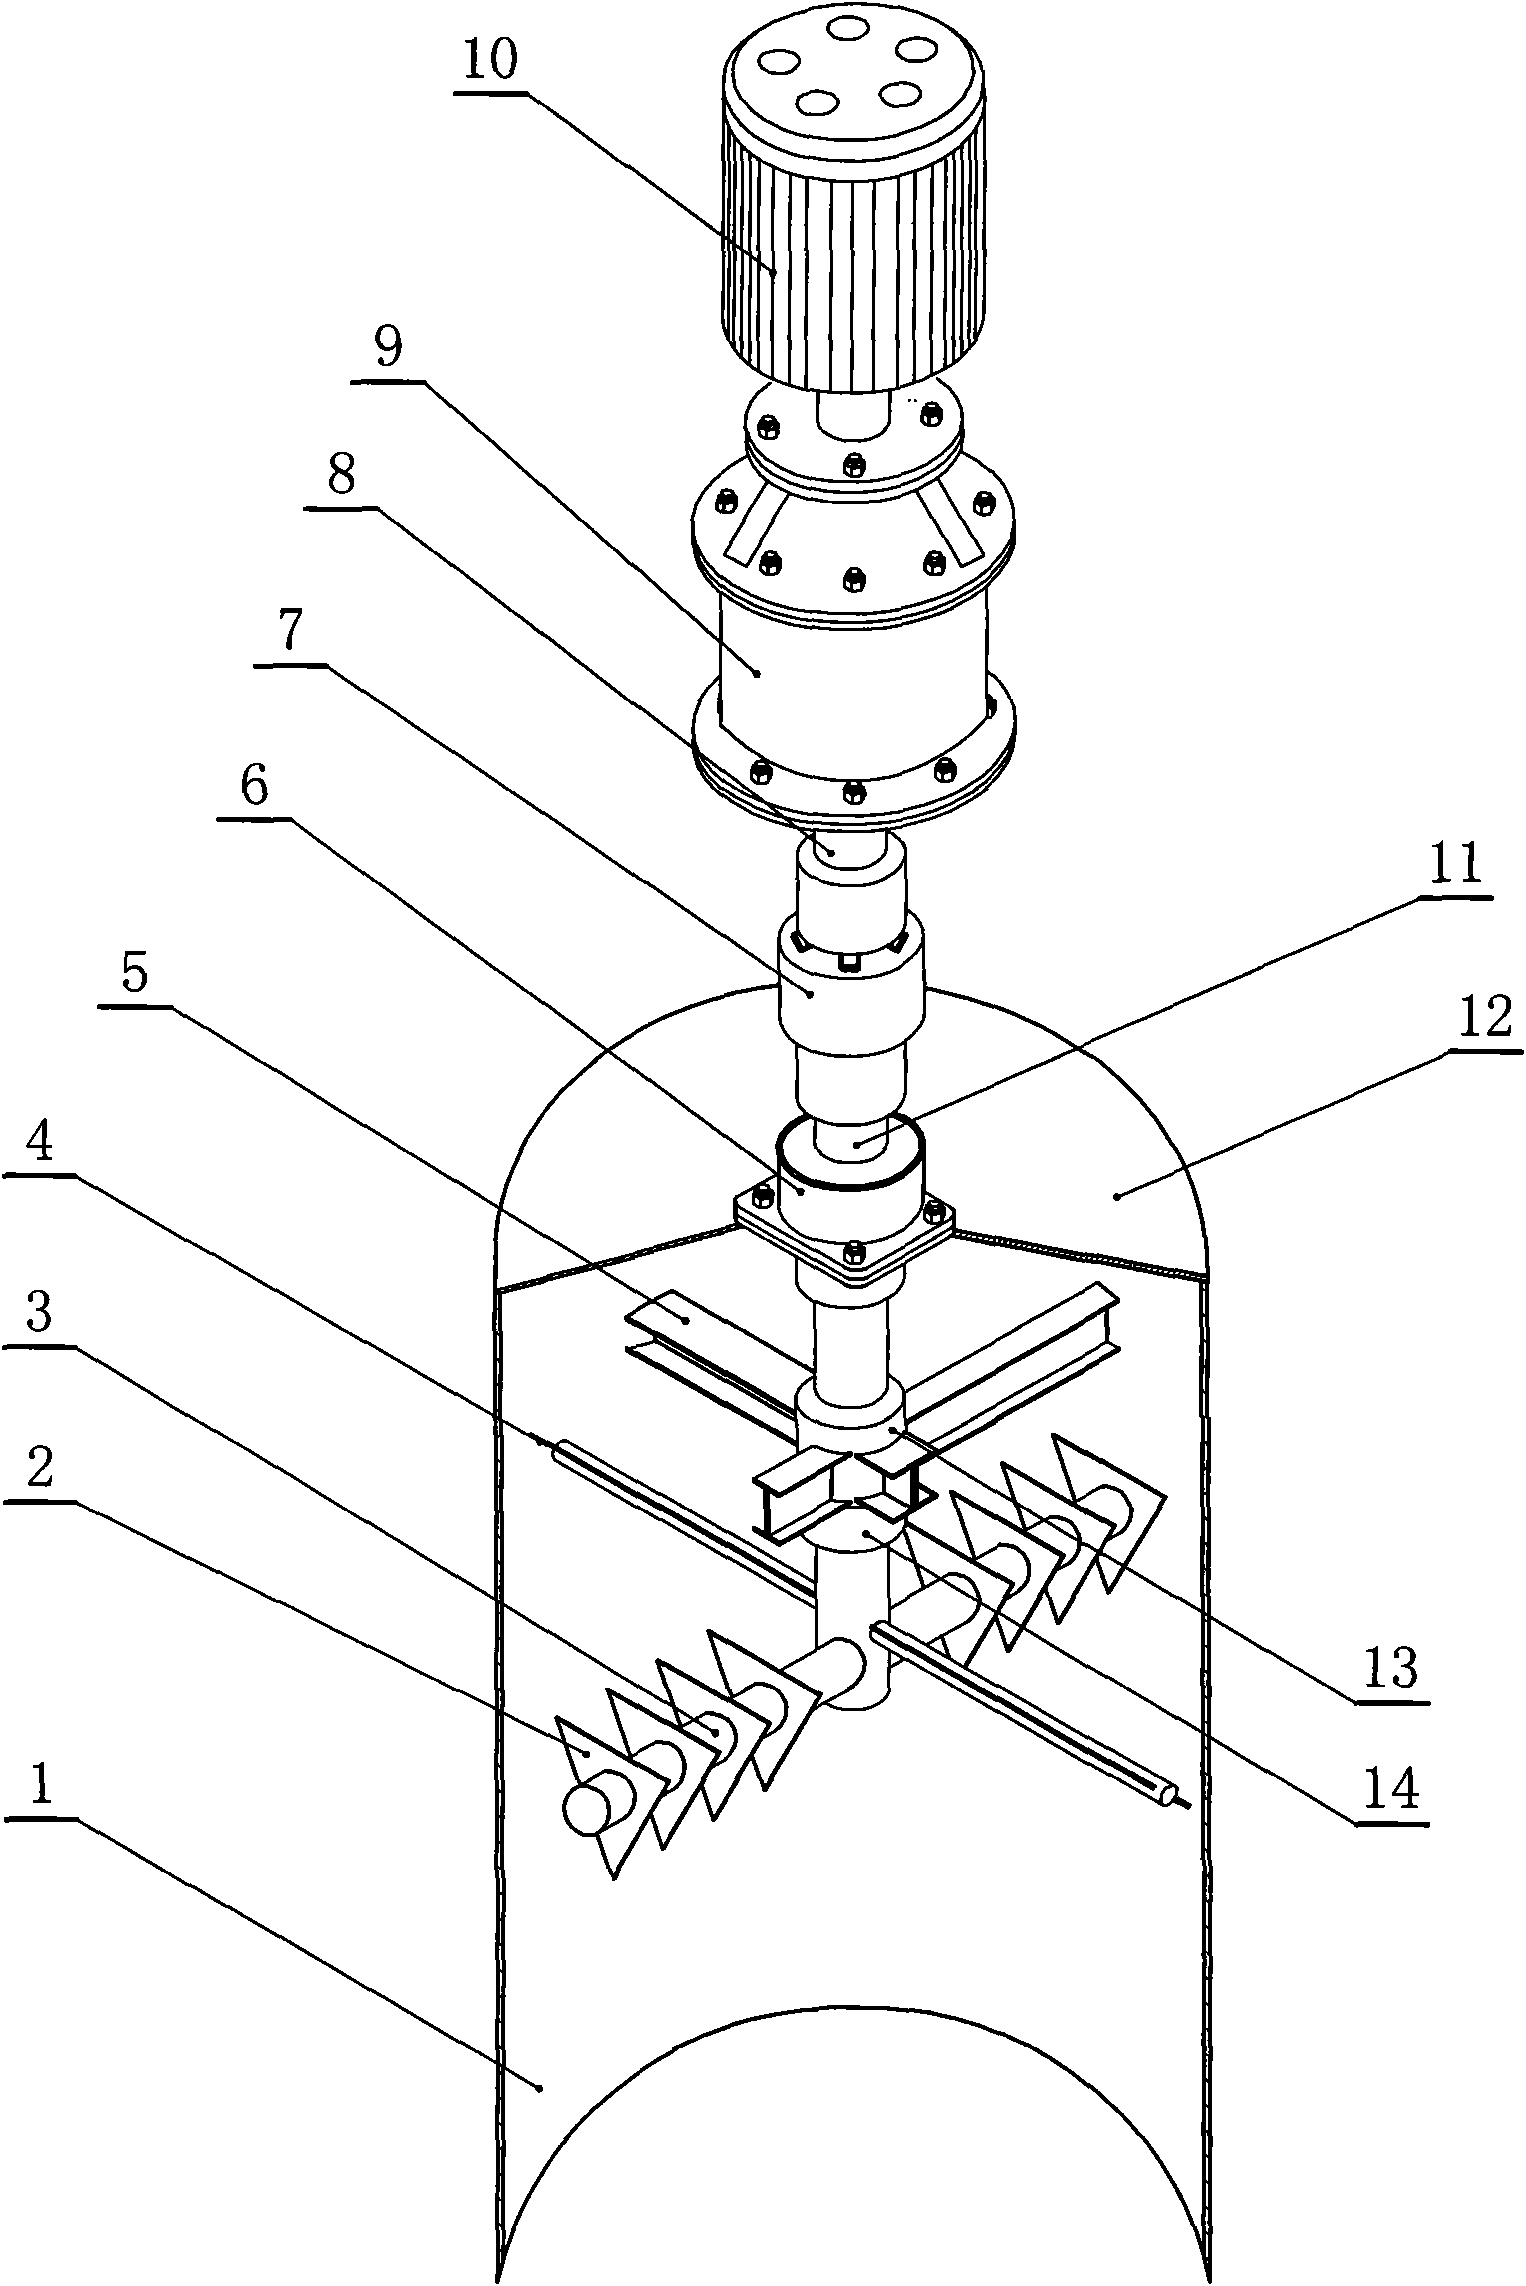 Fuel leveling device for downdraft gasifying furnace